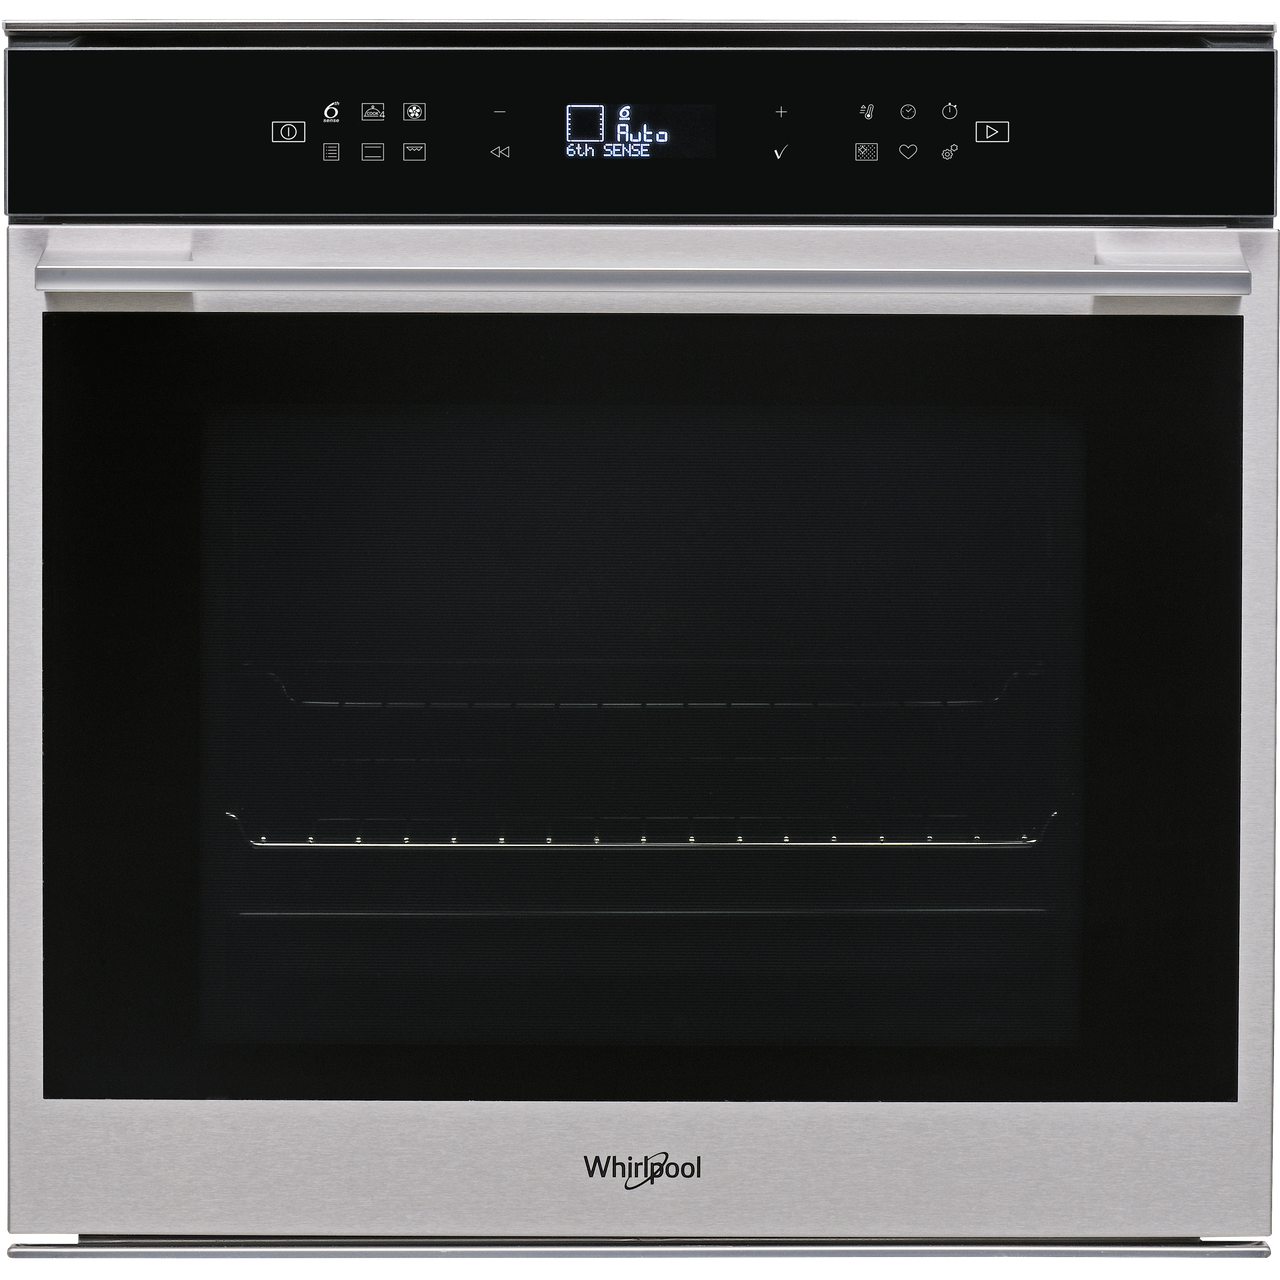 Whirlpool W Collection W7OM44S1P Built In Electric Single Oven Review